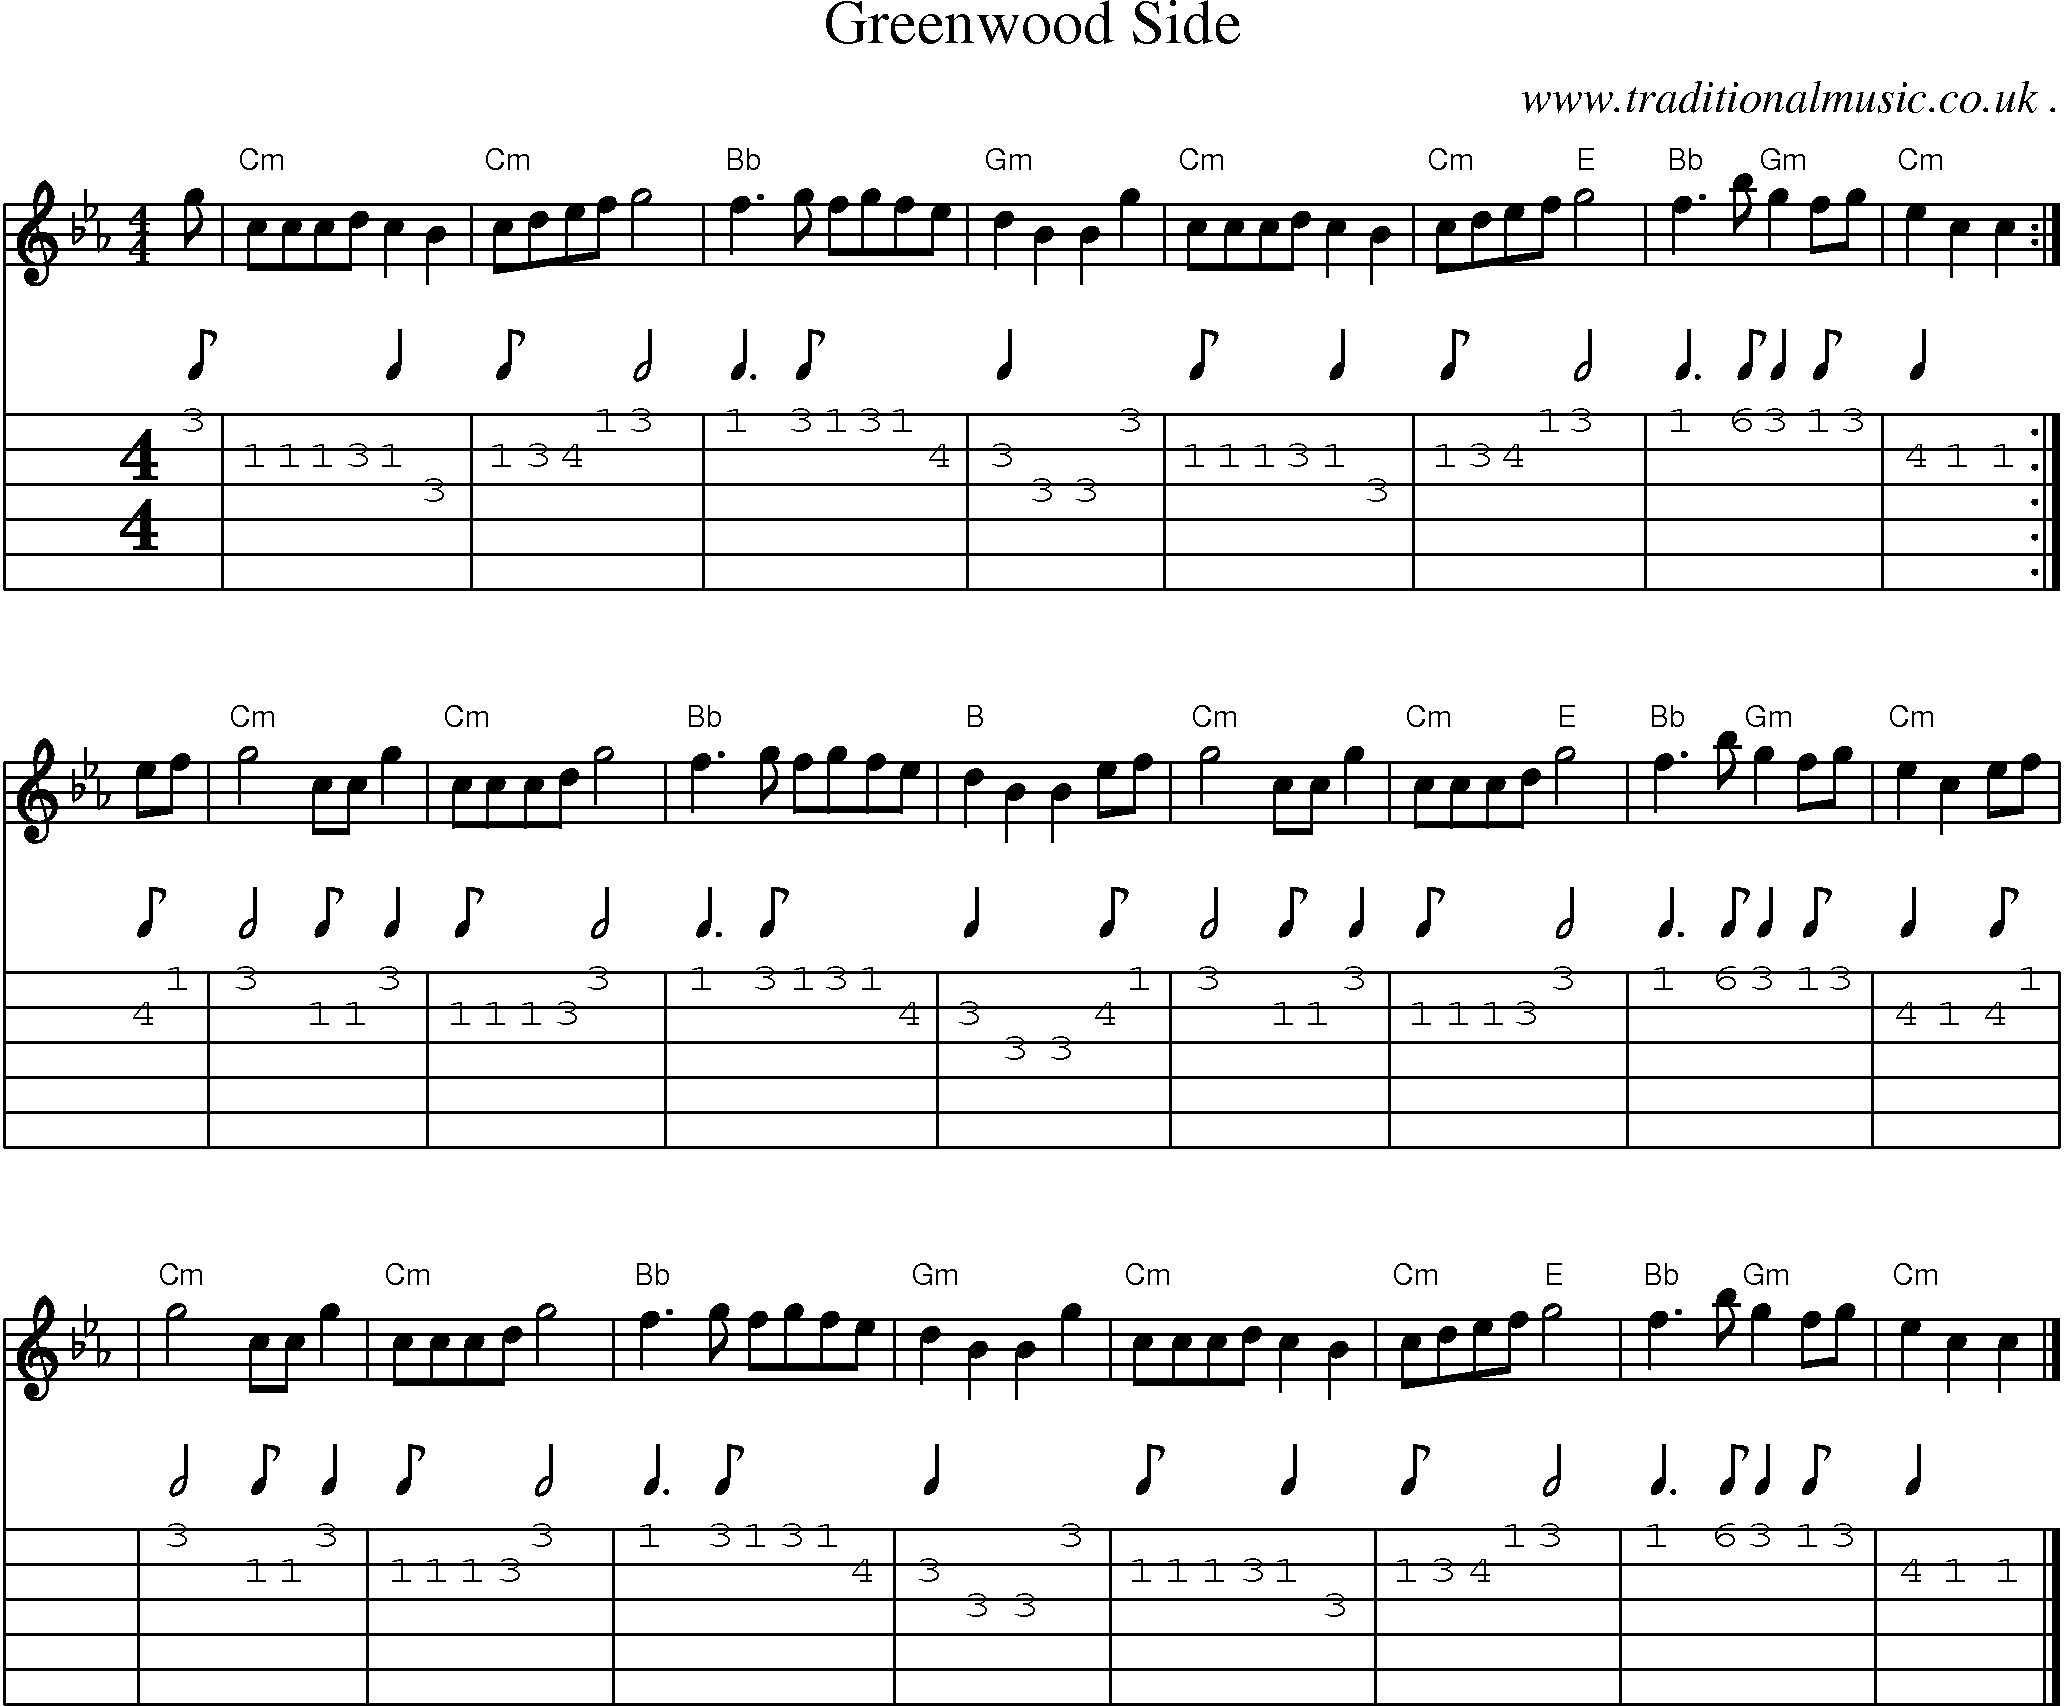 Sheet-music  score, Chords and Guitar Tabs for Greenwood Side